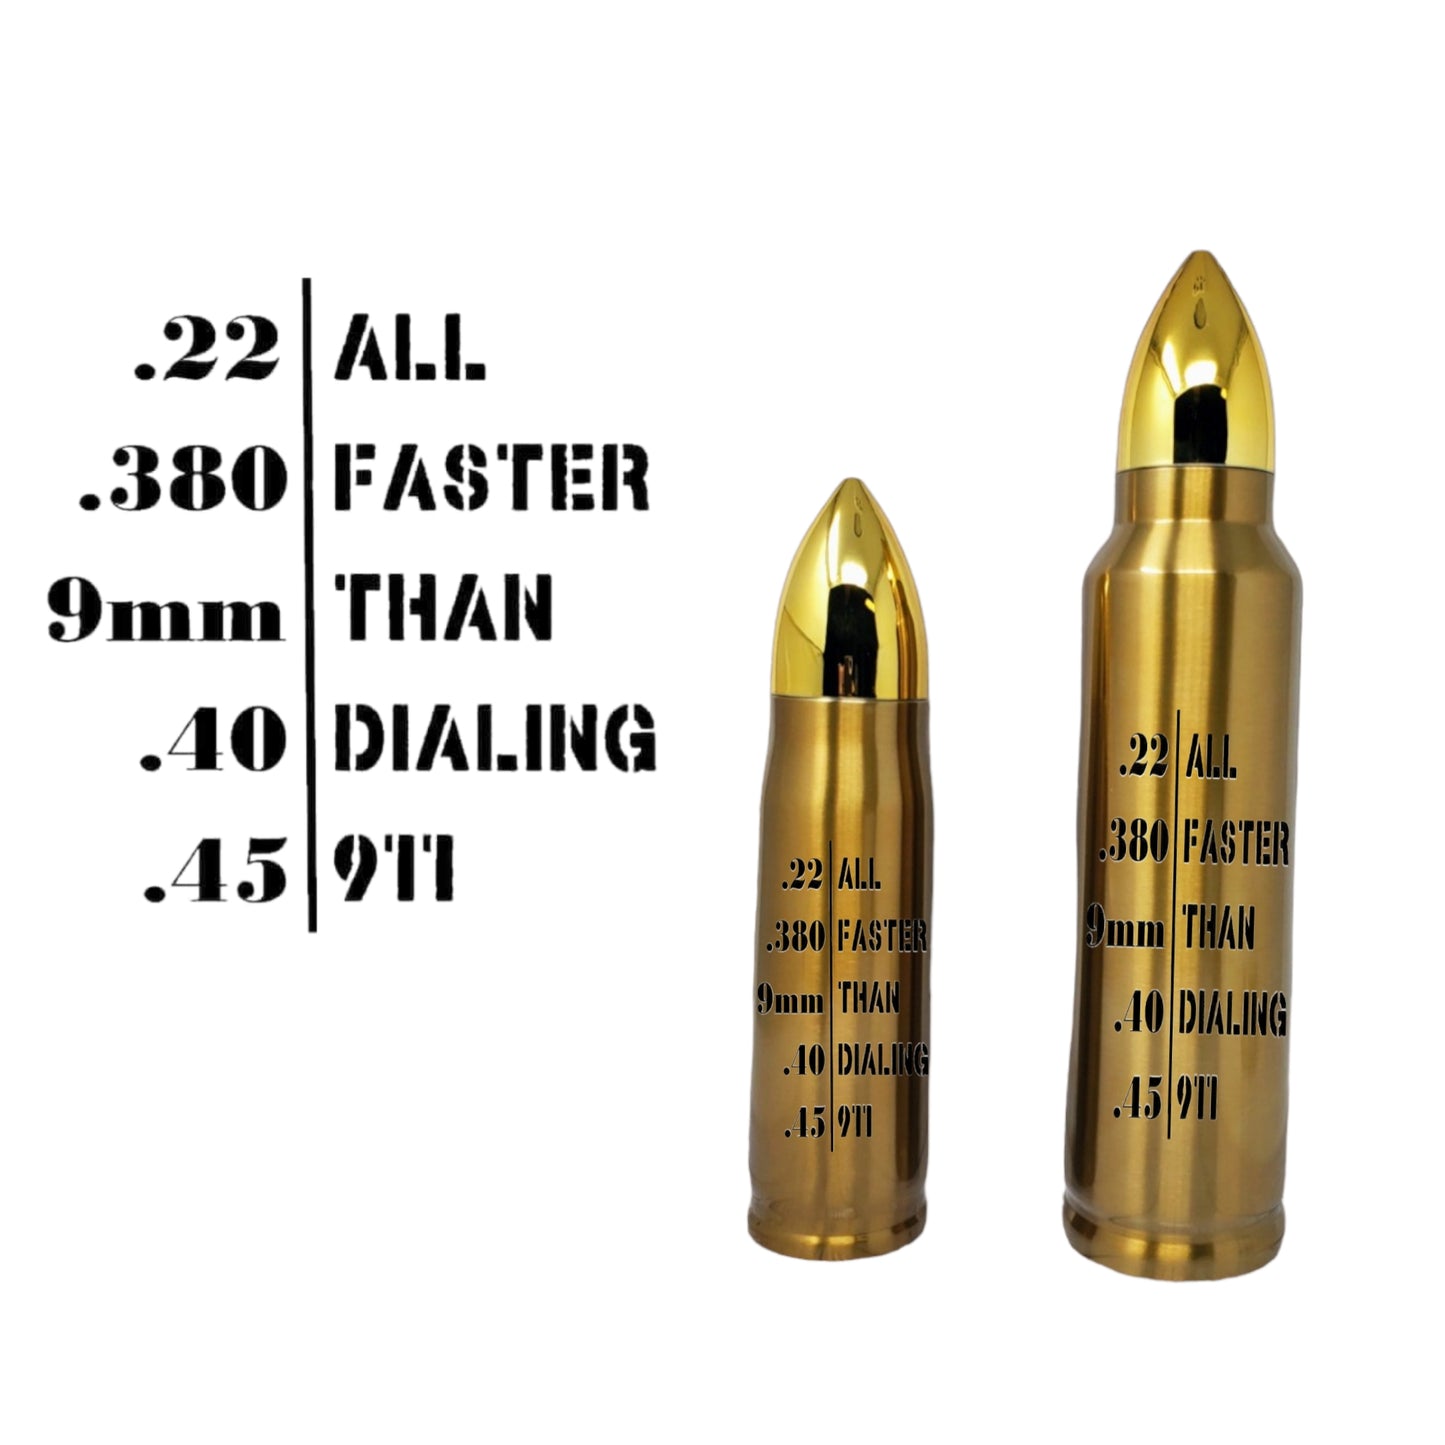 Dialing 911 Bullet Thermos